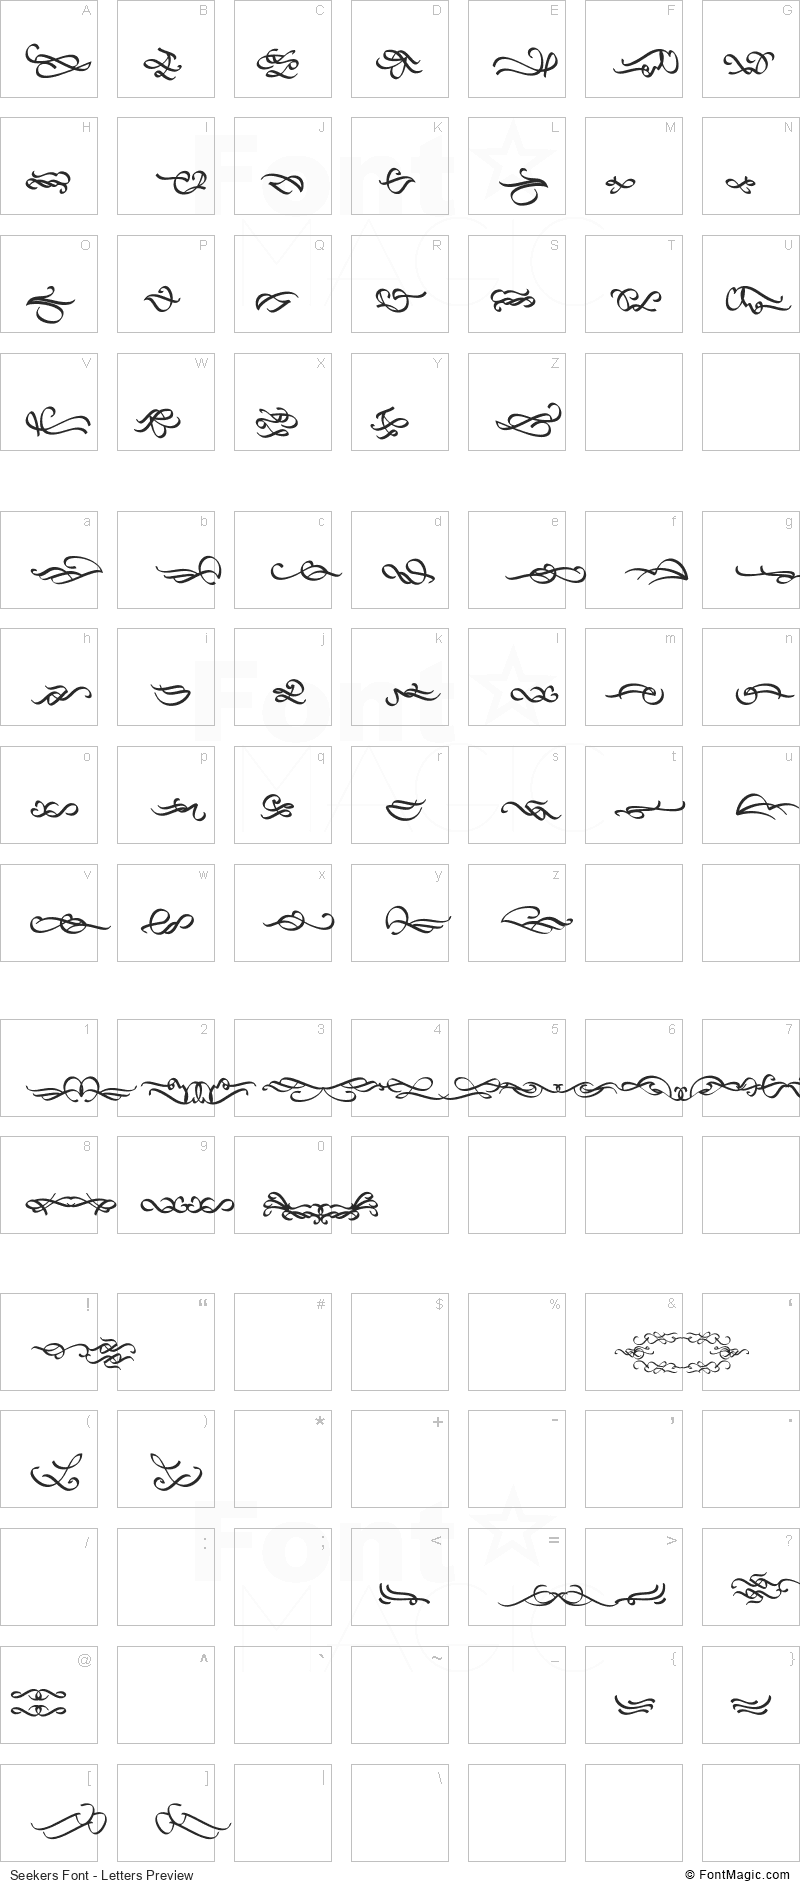 Seekers Font - All Latters Preview Chart